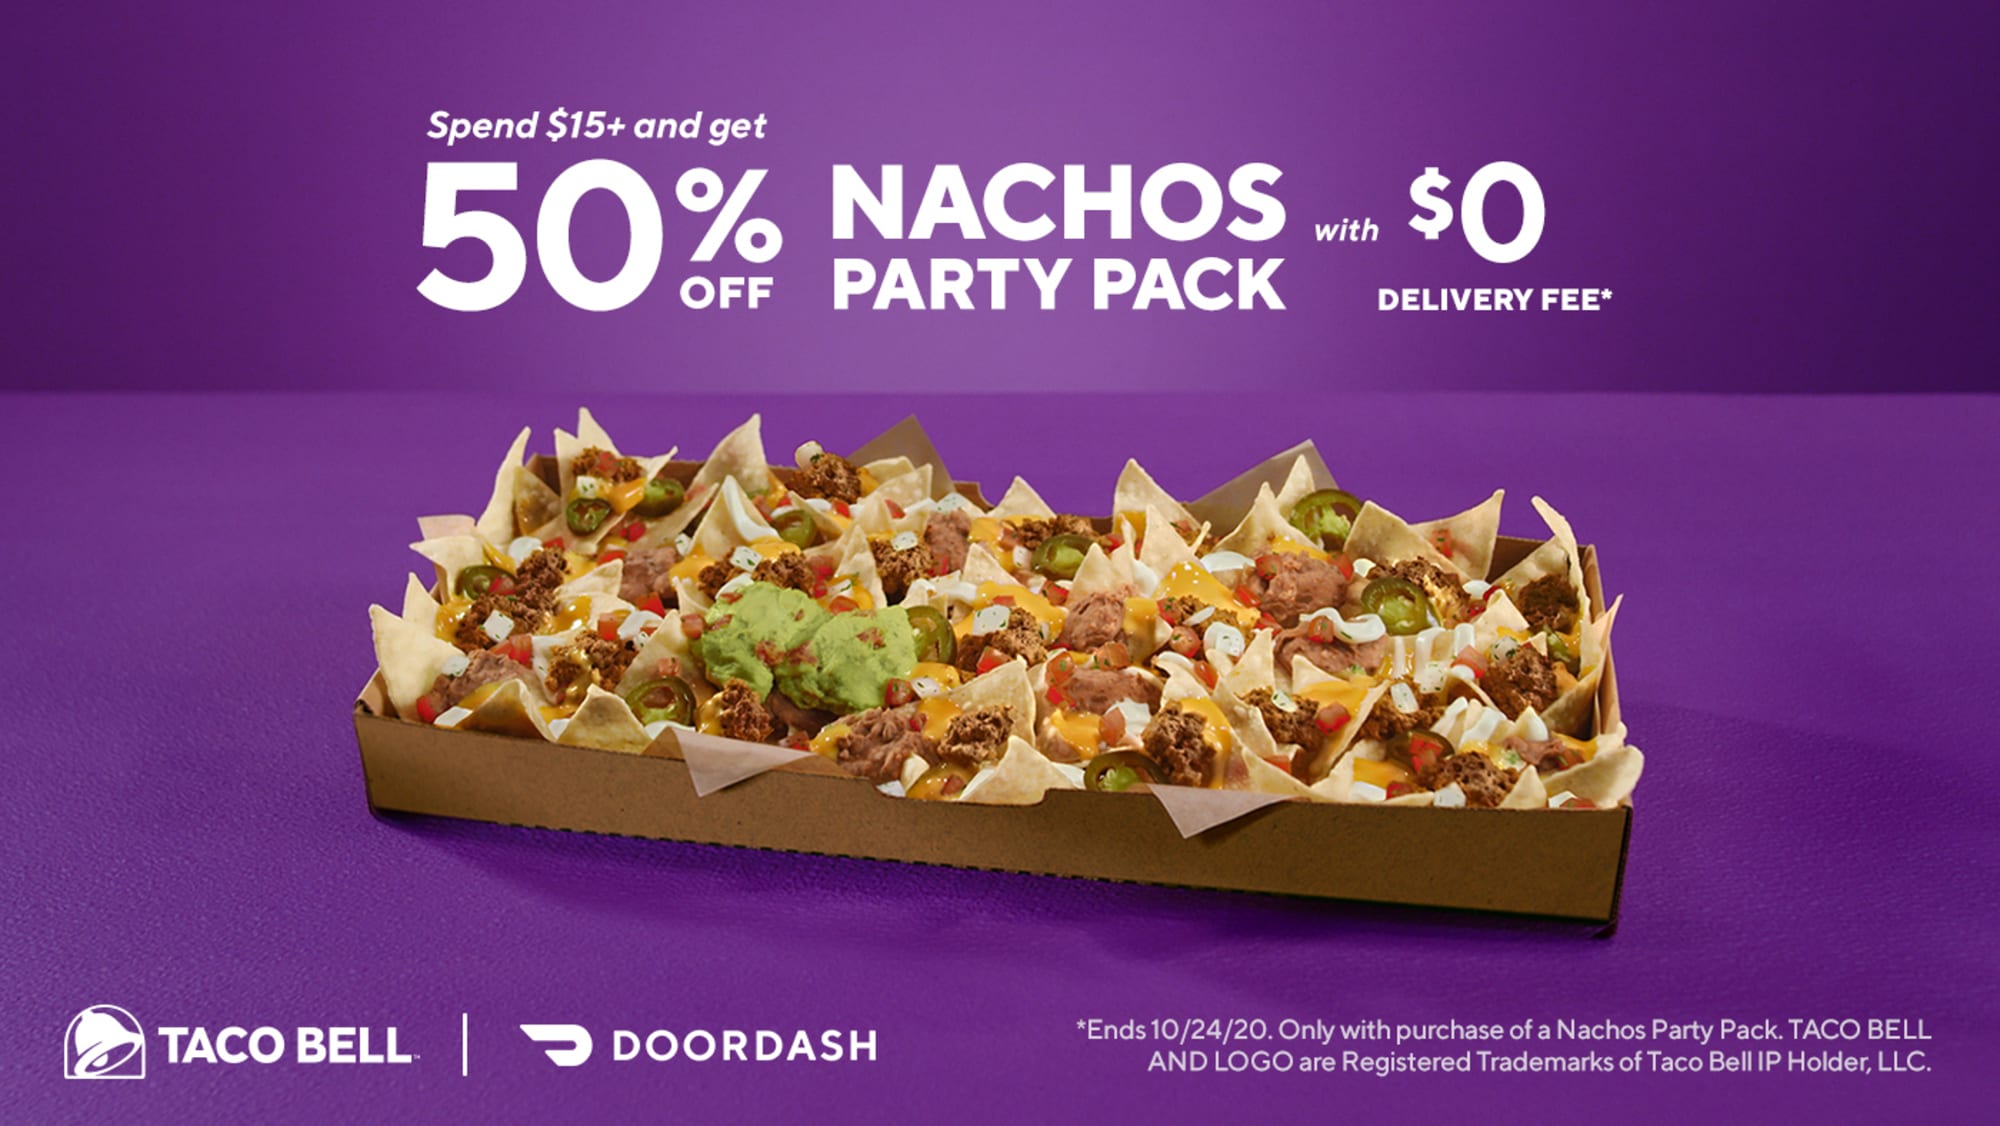 DoorDash partners with Taco Bell and kicks things off with a deal